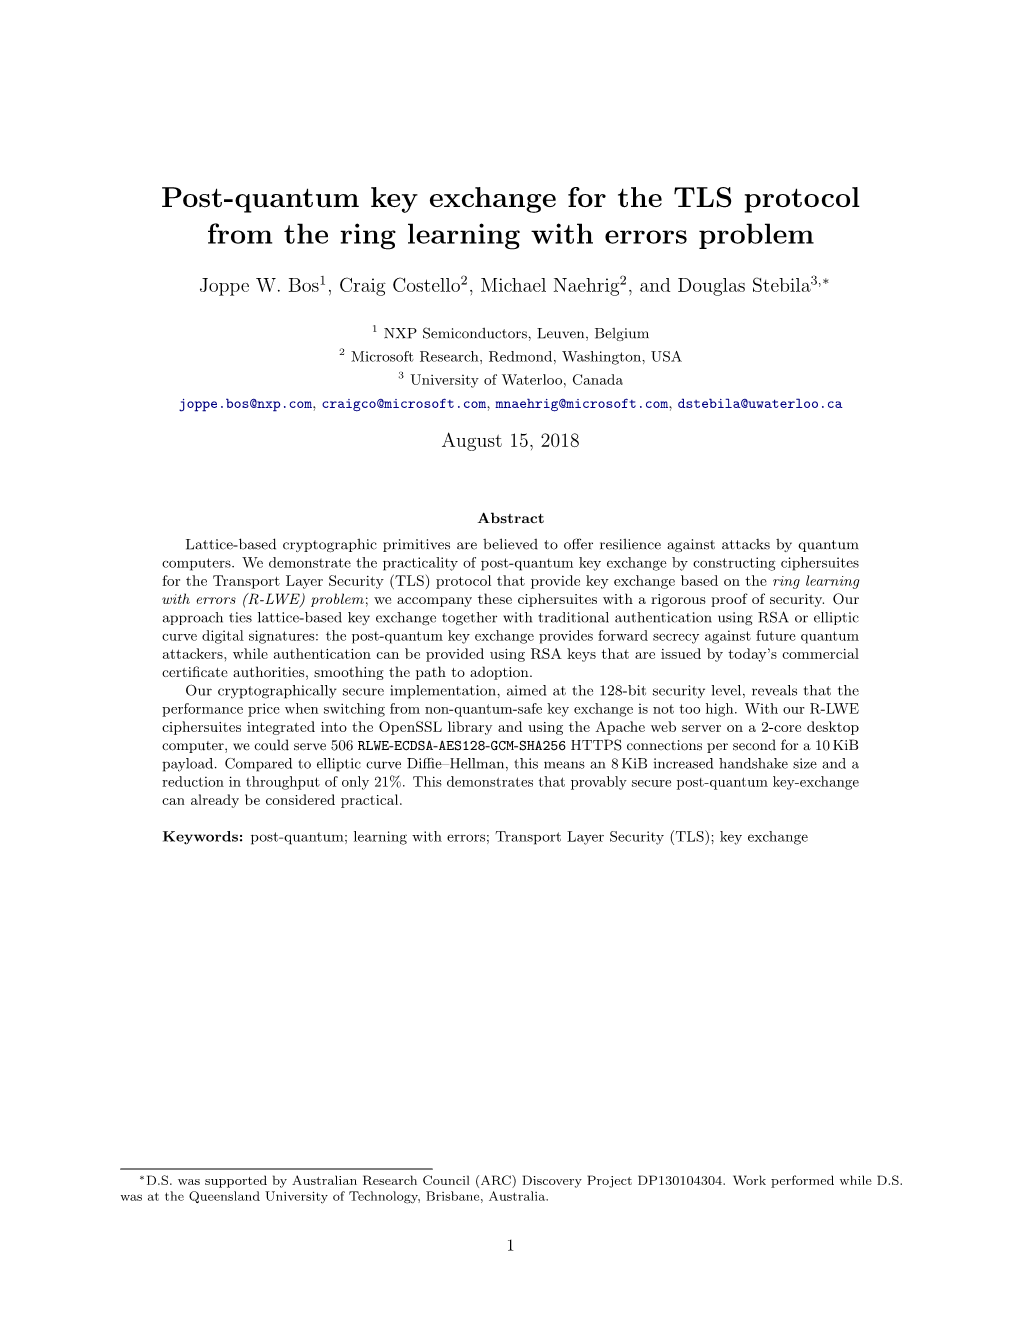 Post-Quantum Key Exchange for the TLS Protocol from the Ring Learning with Errors Problem